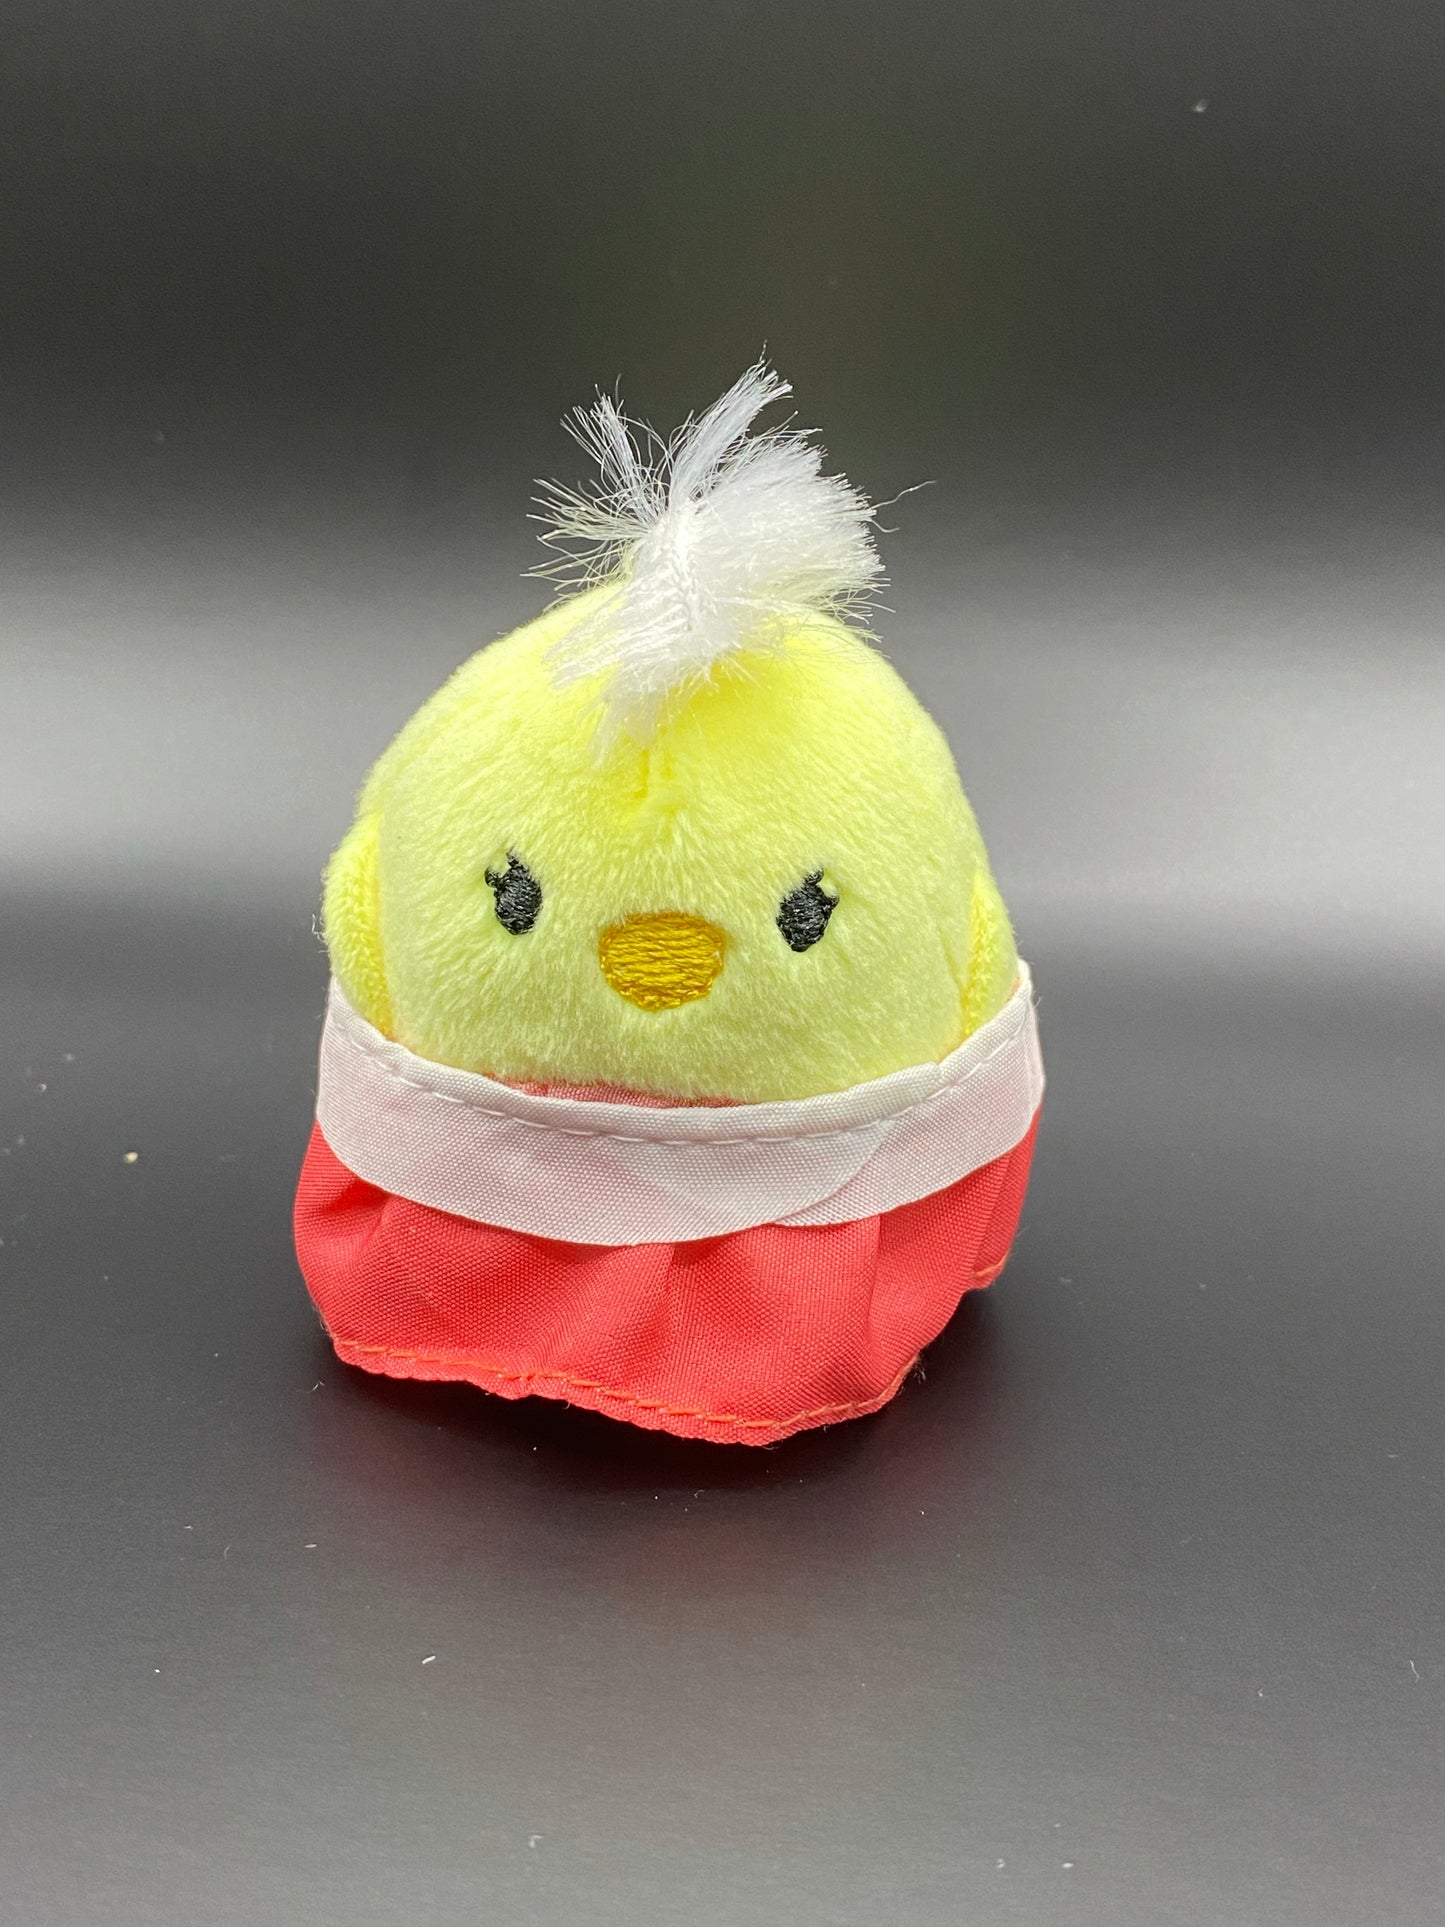 RARE ~ Yellow Chick with Red Dress ~ 2" Individual Squishville by Squishmallows